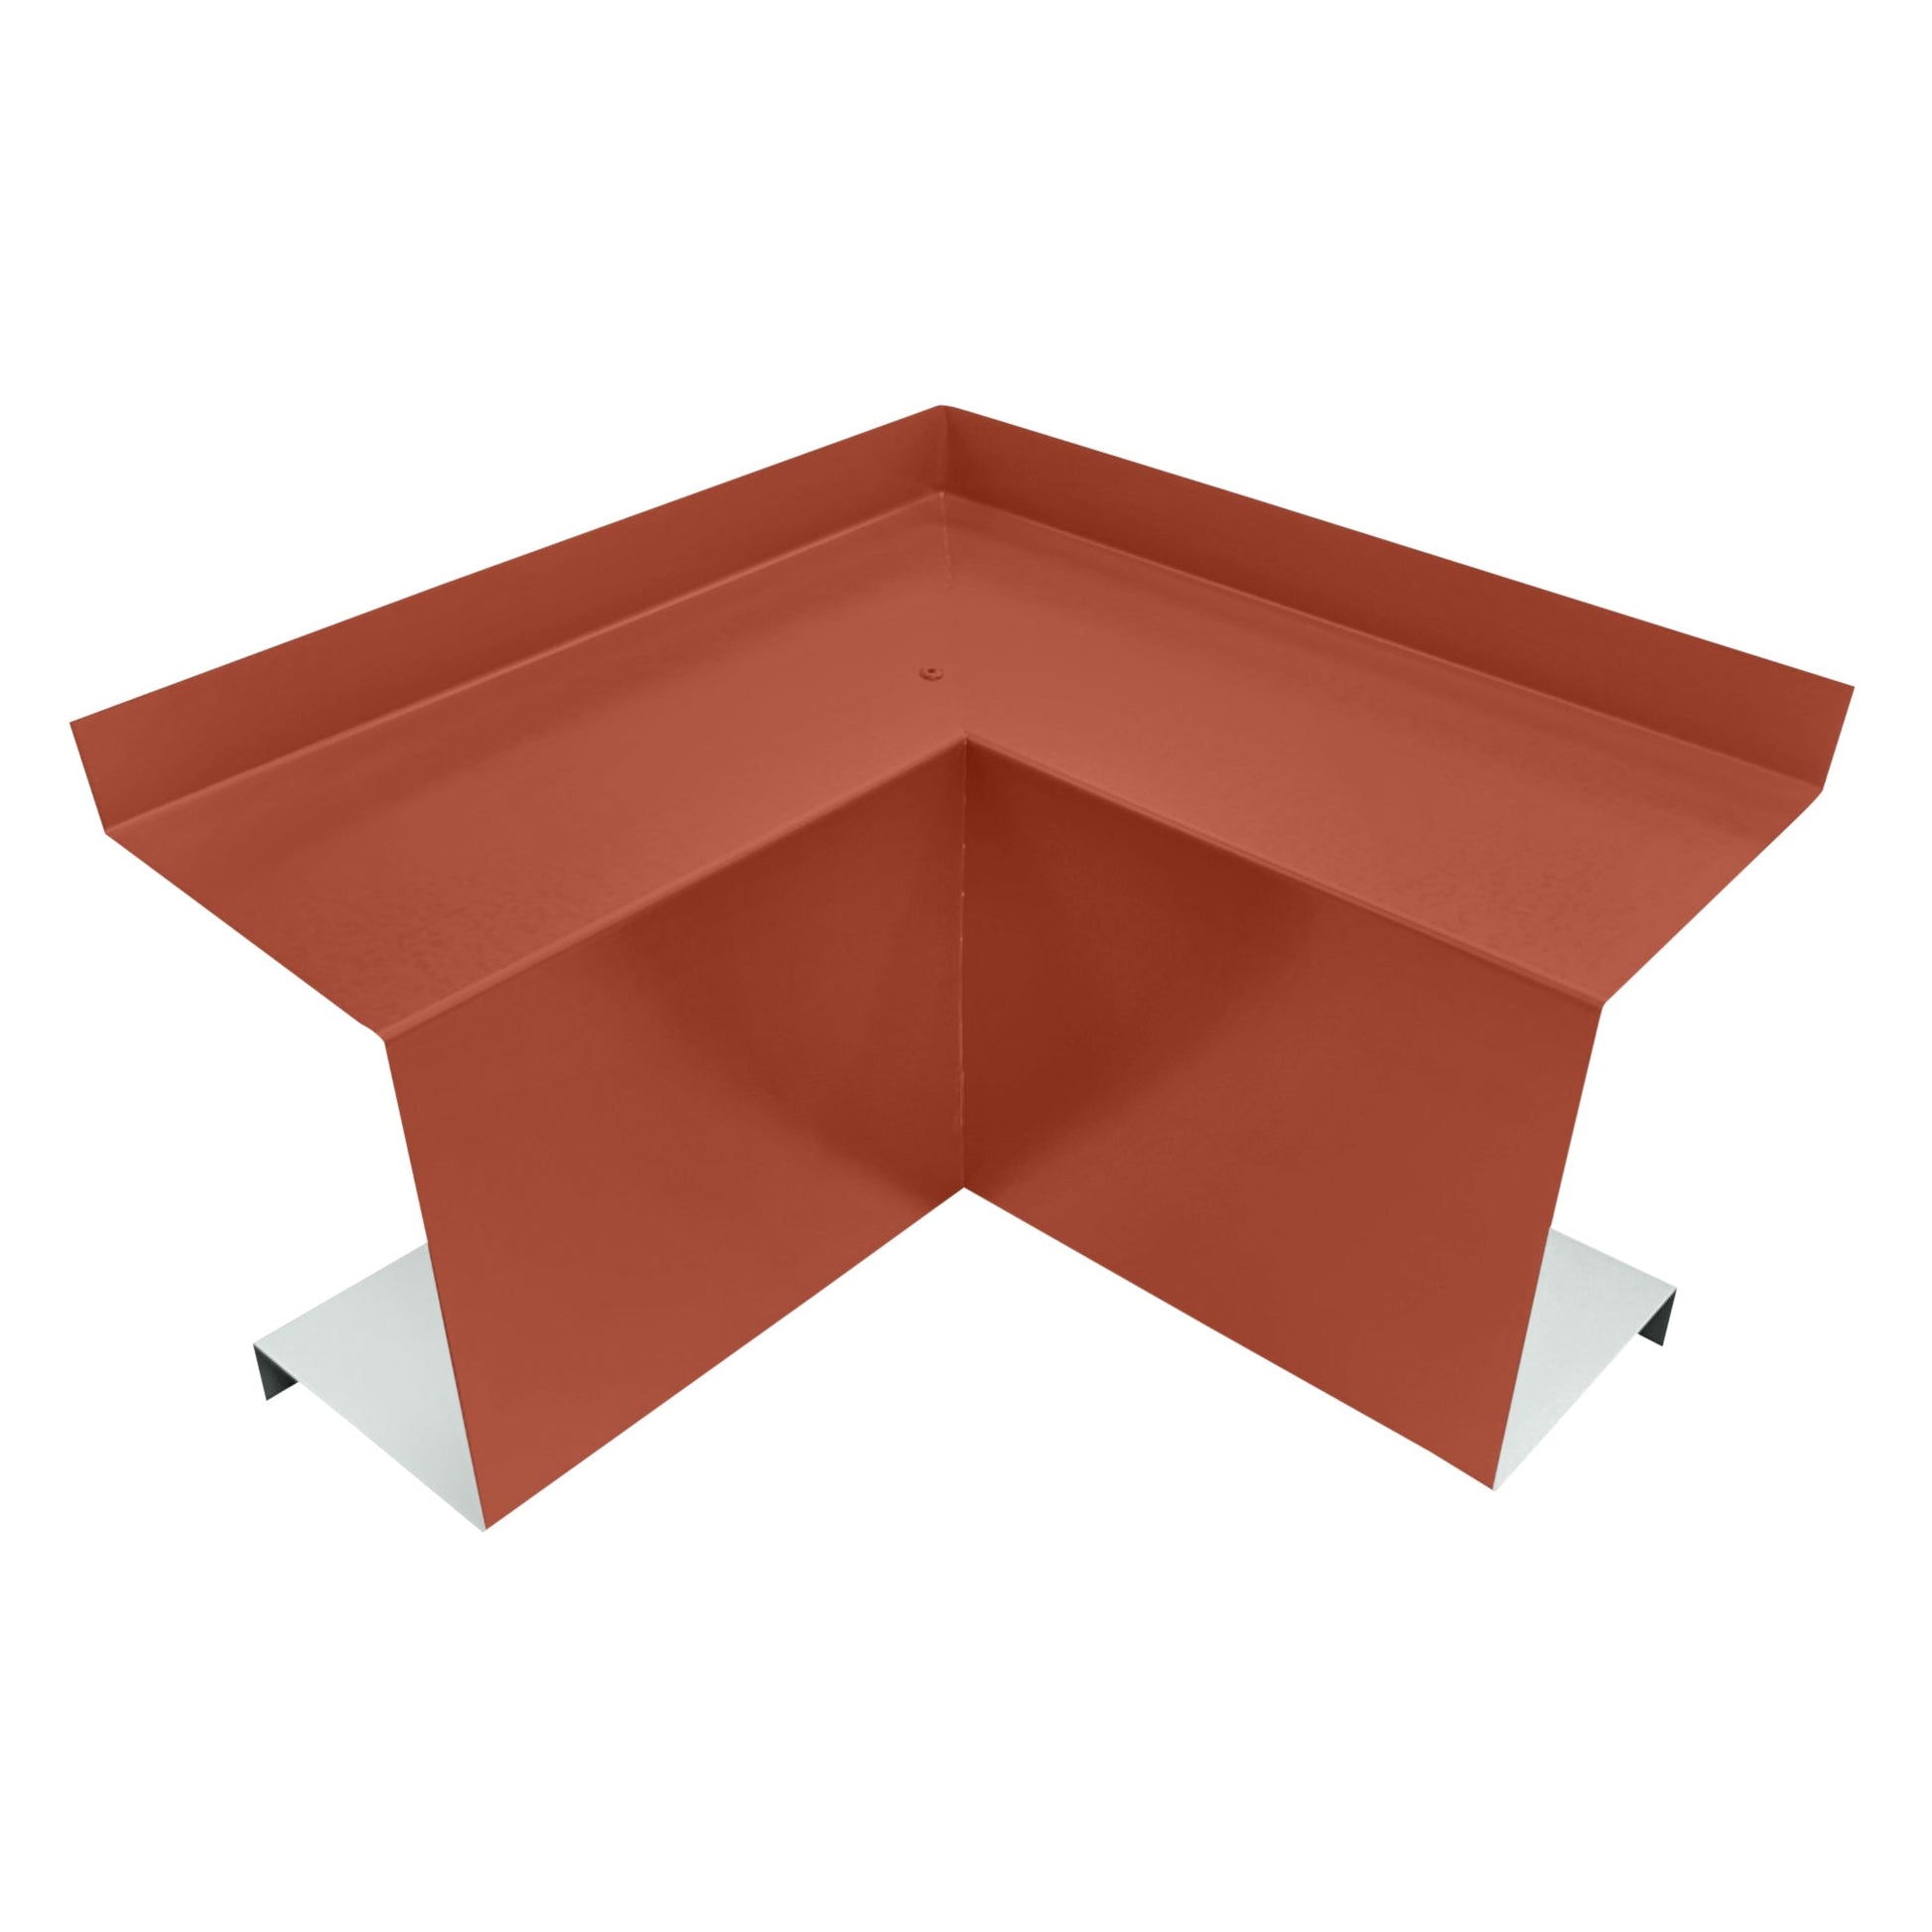 A red metal corner piece with a right-angle bend, typically used for roofing or HVAC installations. The piece features a folded edge for fitting against two perpendicular surfaces, providing support and sealing. Perfect for Perma Cover Residential Series - Line Set Cover Inside Corner Elbows - Premium Quality, the background is plain white.